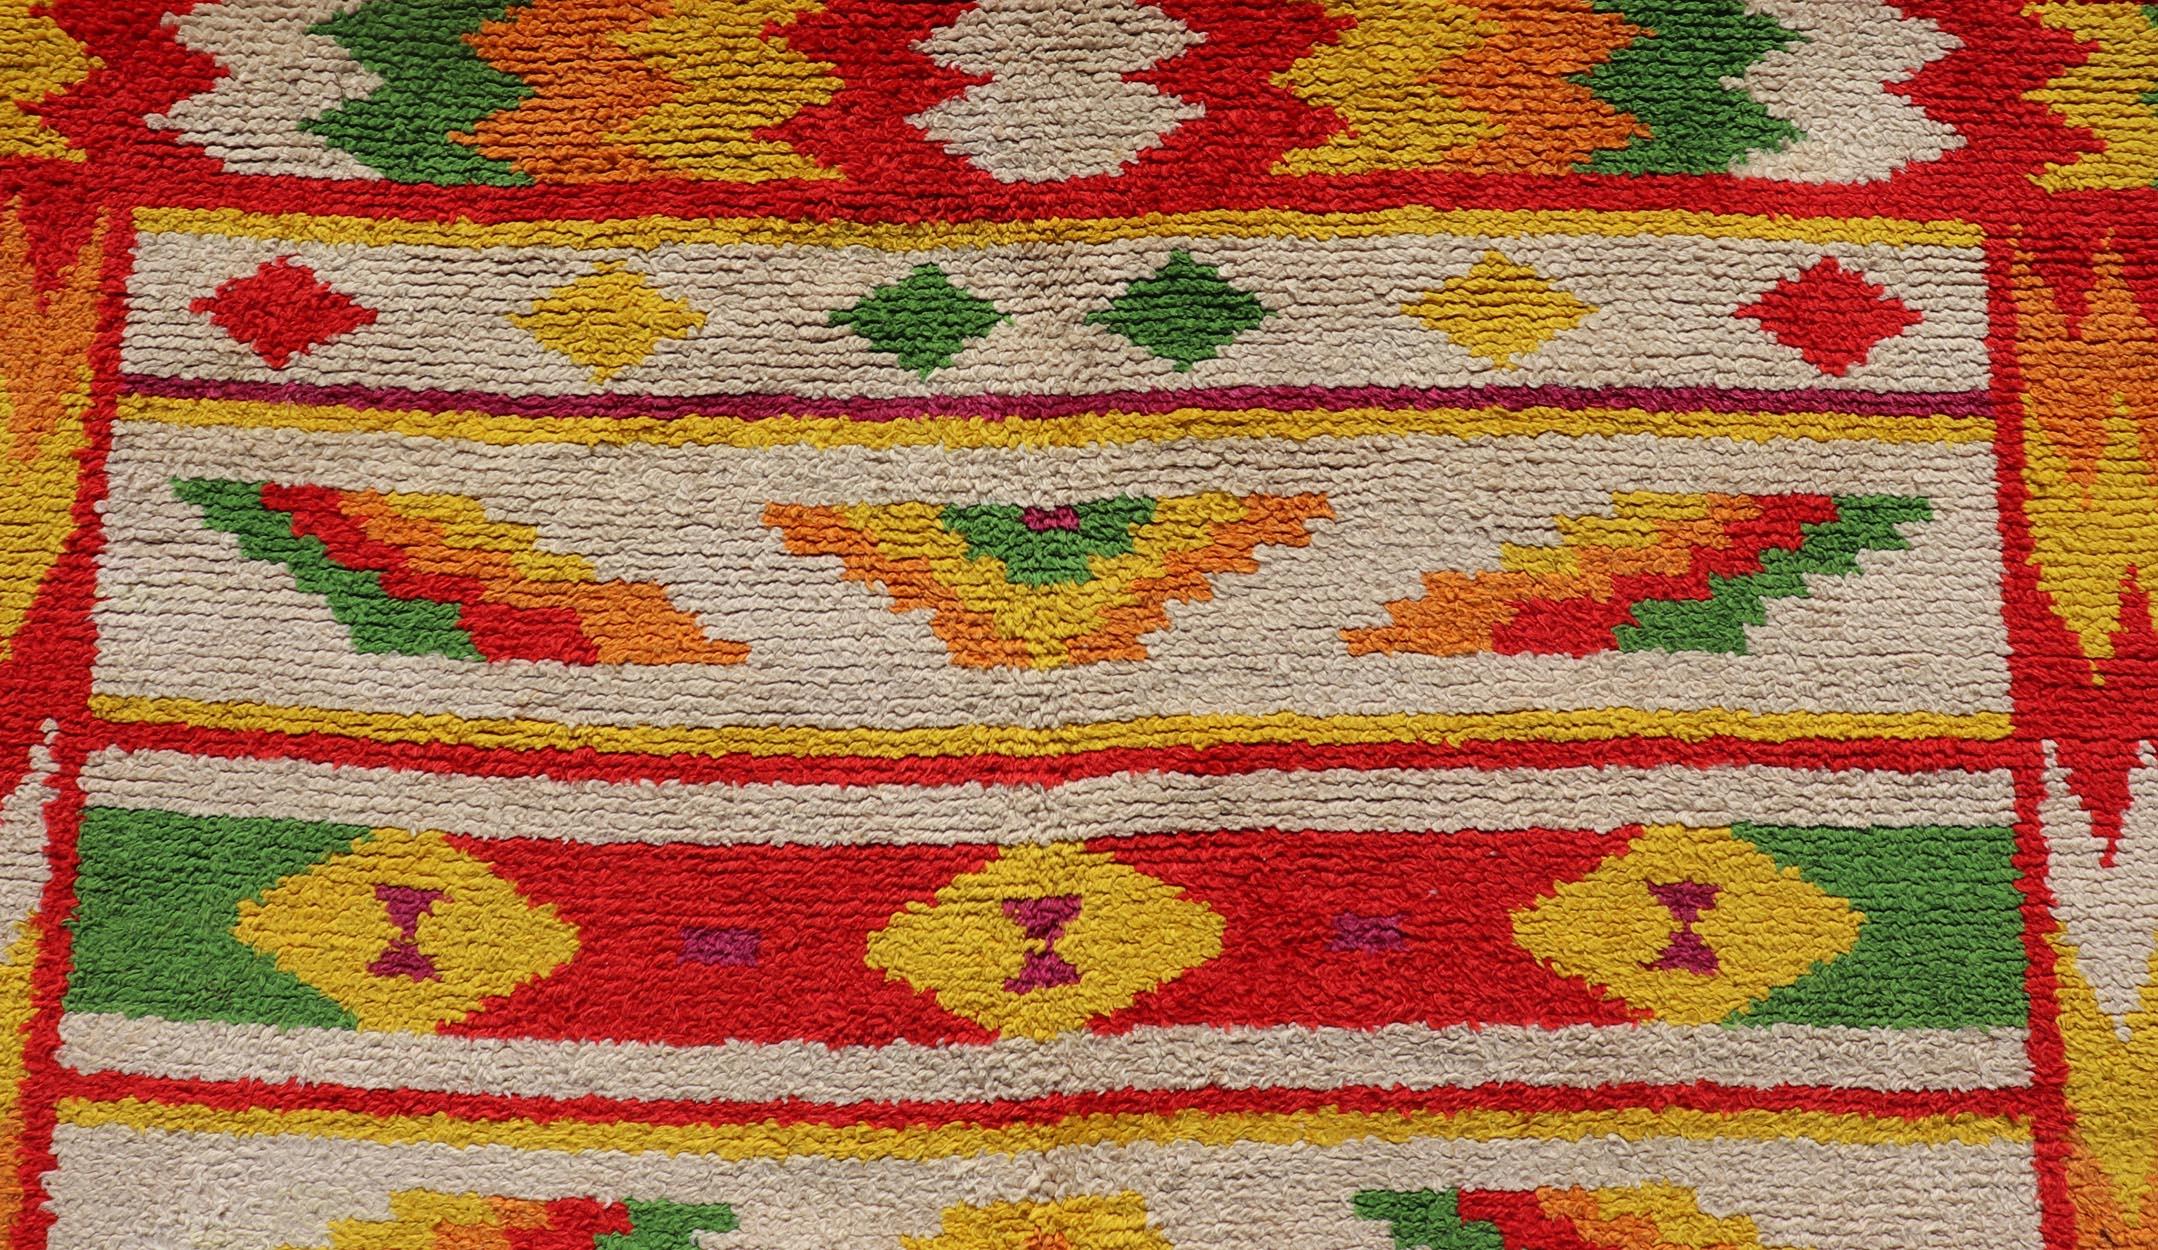 20th Century Vintage Moroccan Rug with All-Over Tribal Motif Design In Red, Green & Yellow For Sale